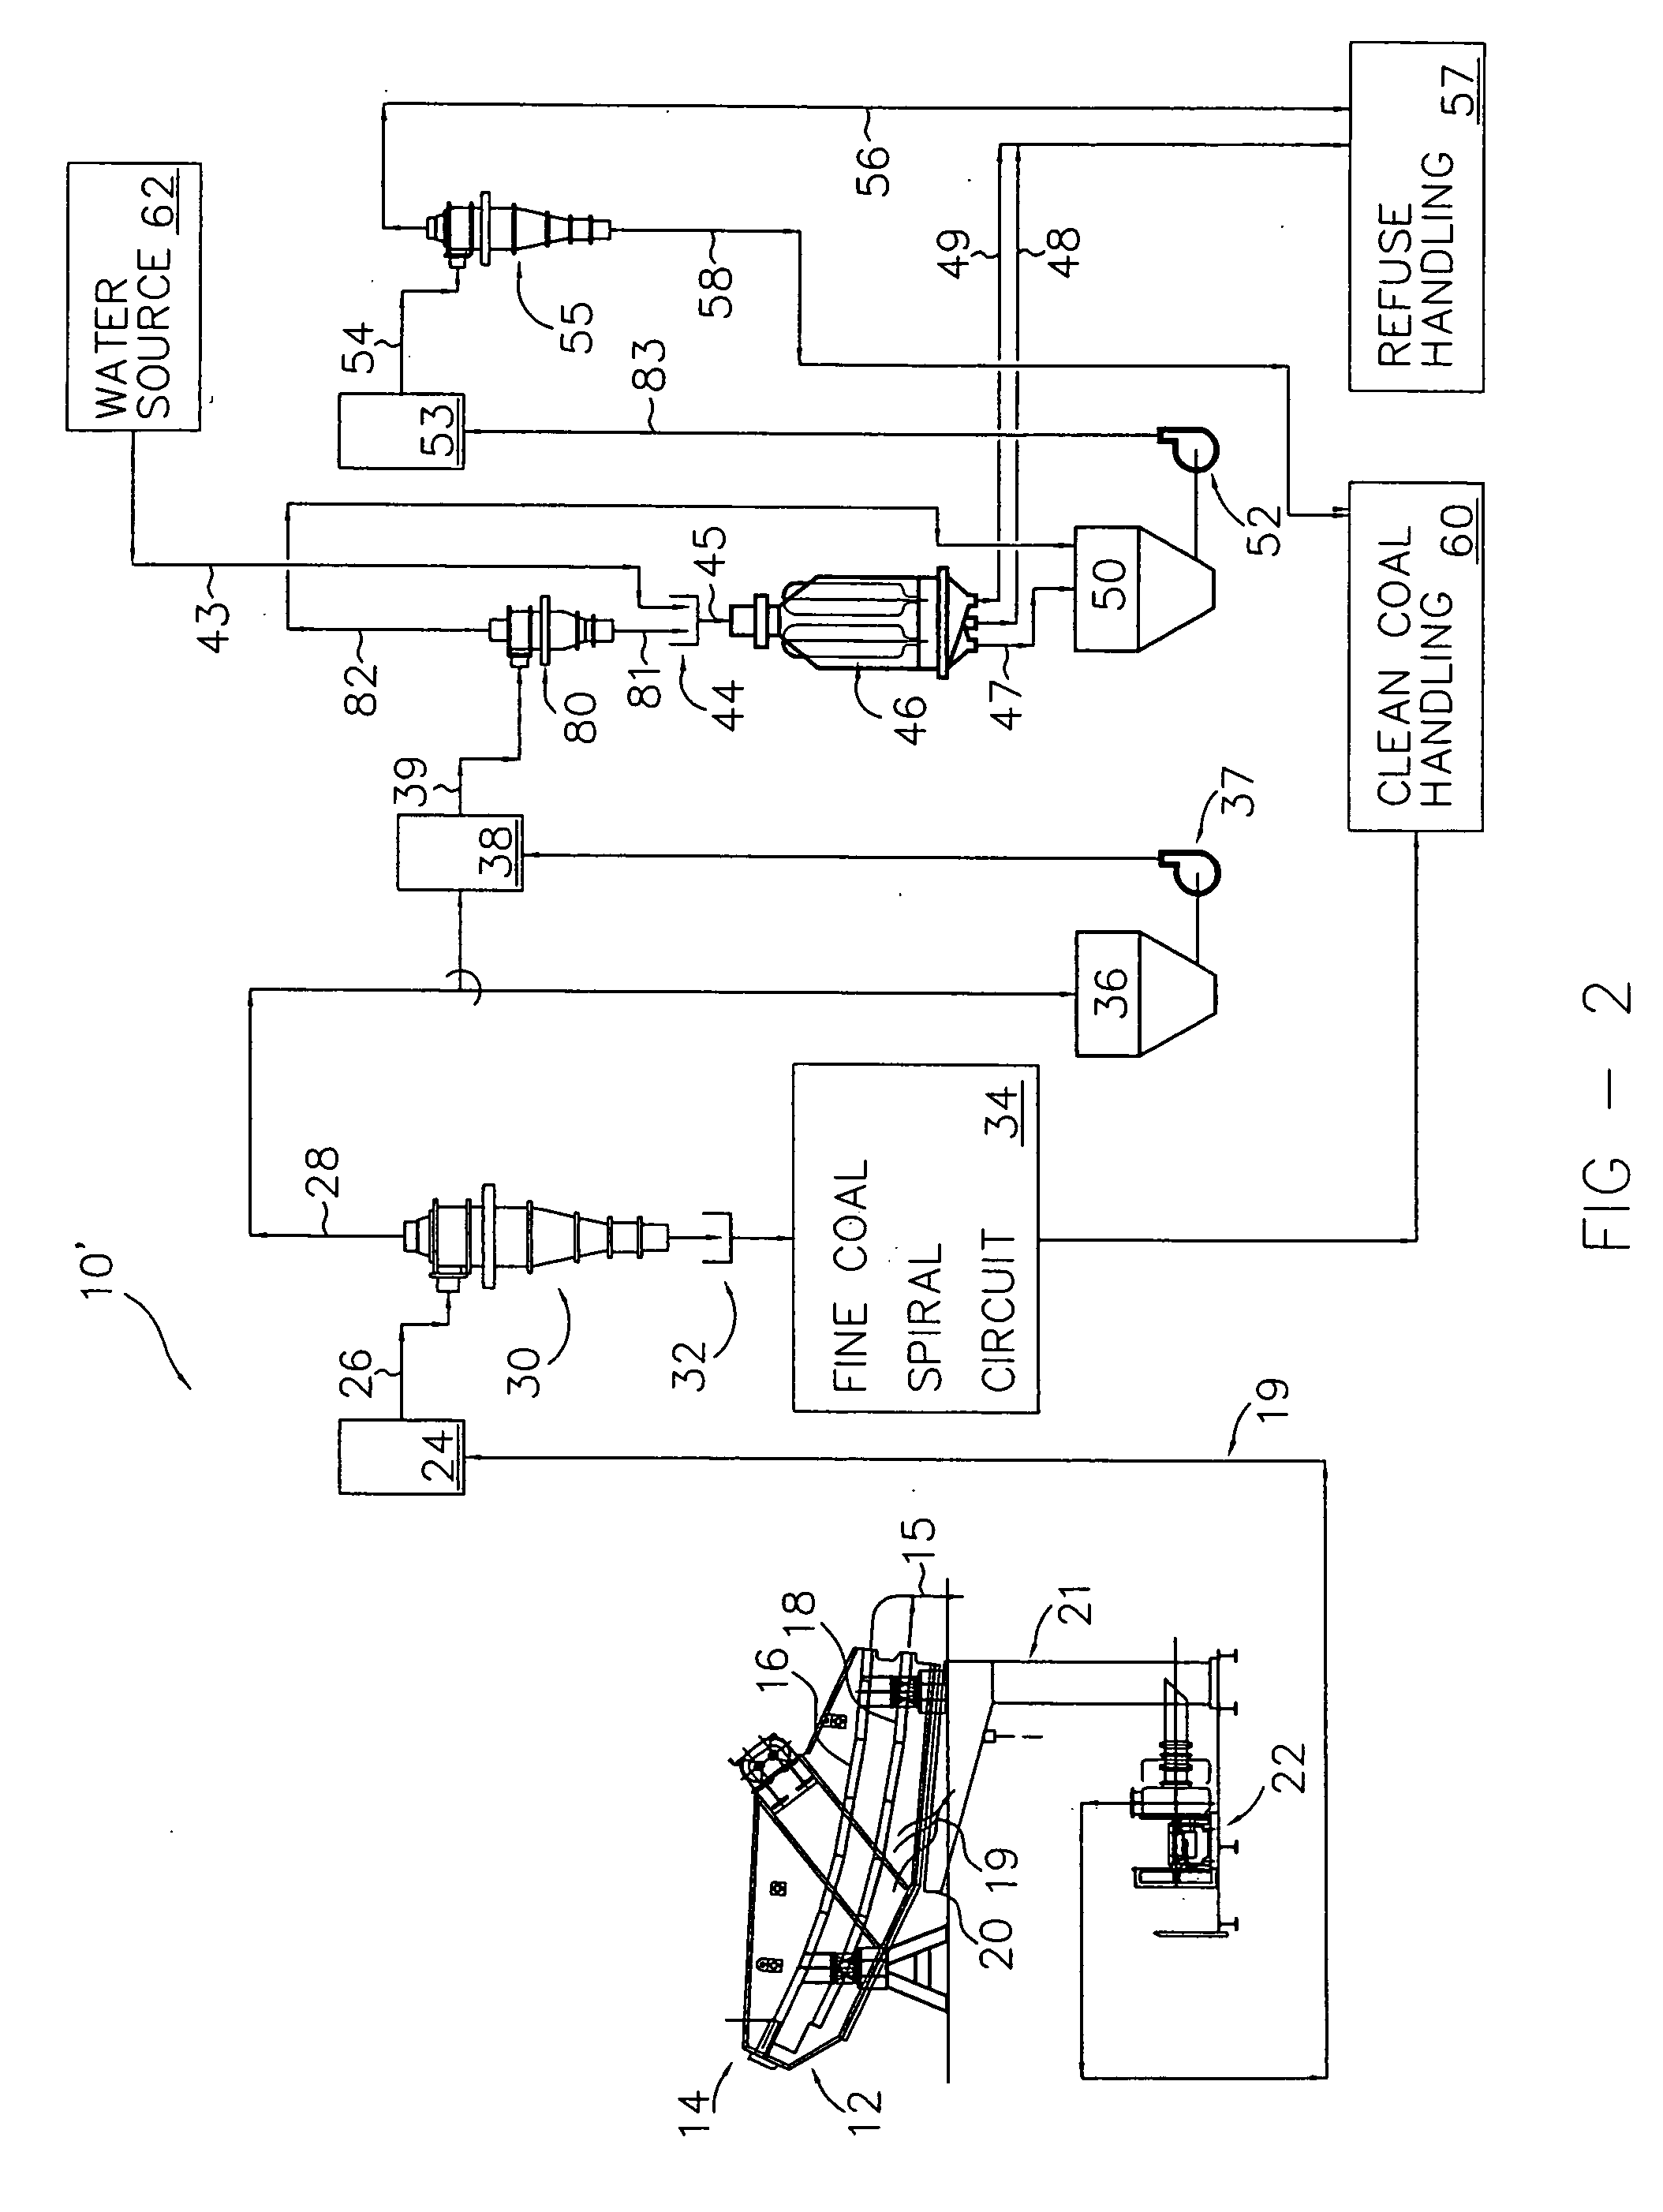 System and method for beneficiating ultra-fine raw coal with spiral concentrators